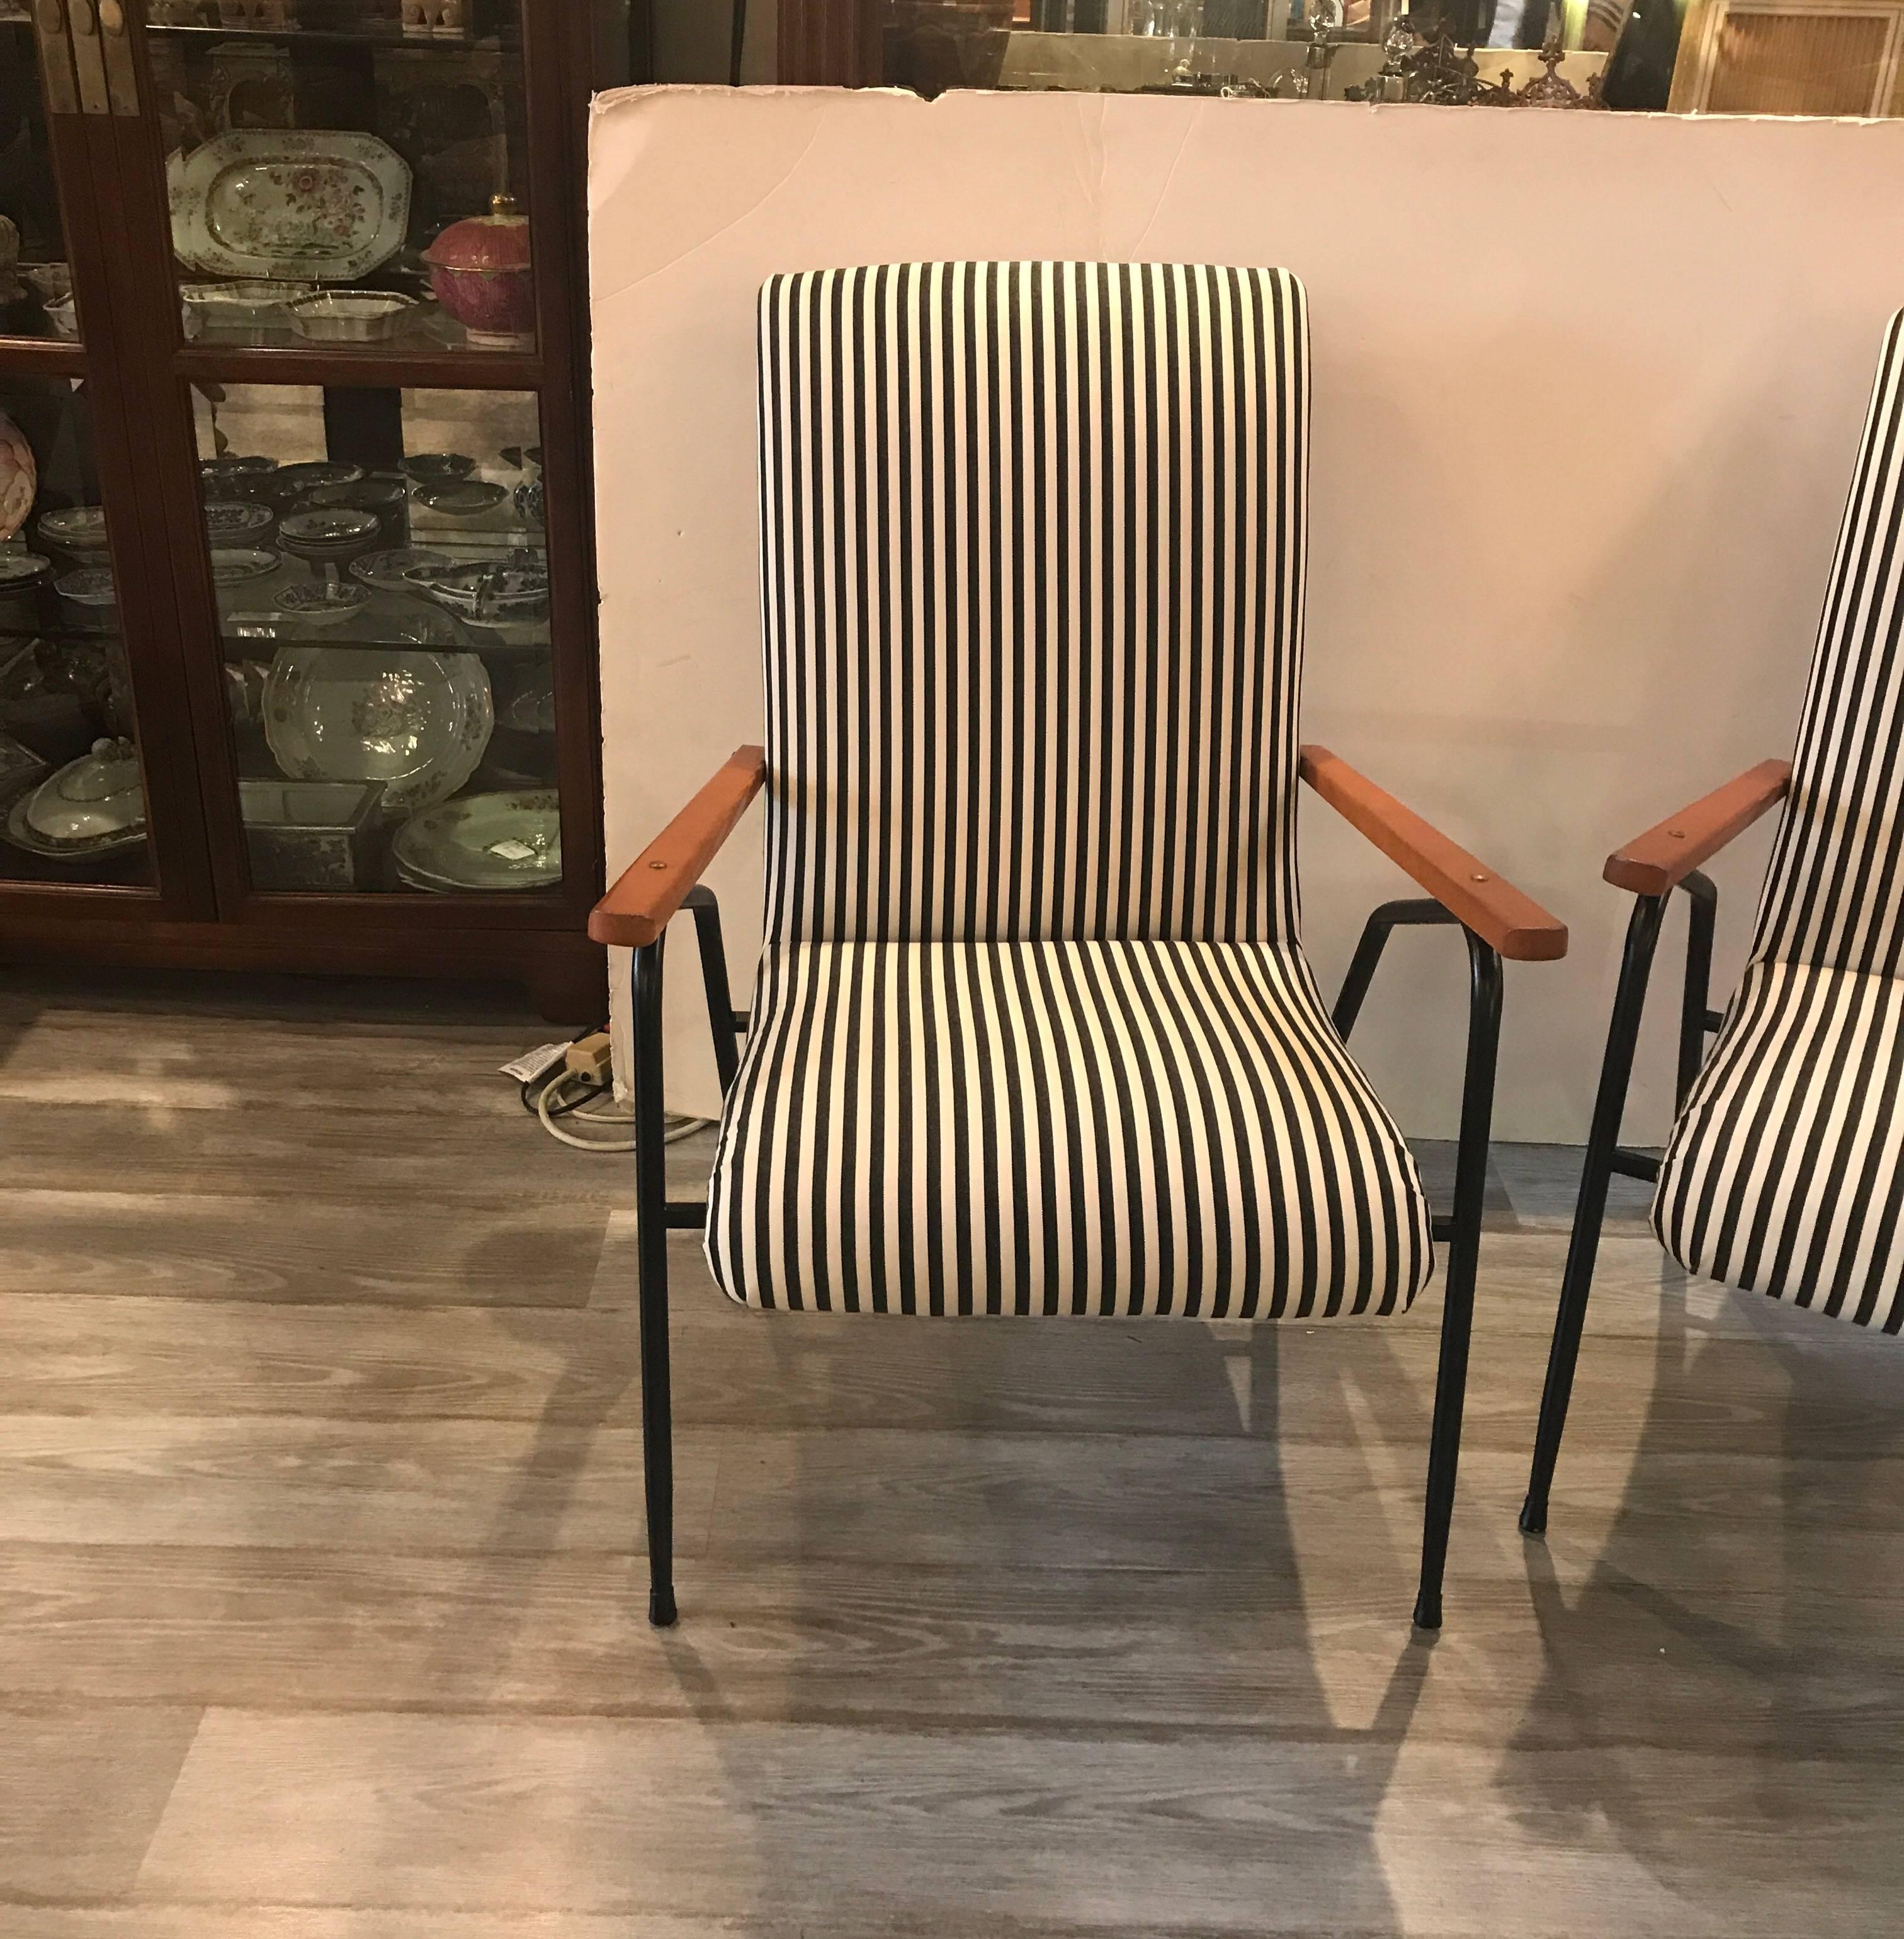 High style and very chic Italian lounge chairs. These were designed for solarium or sun room use originally in the 1950s These are newly covered in a fade and water resistant fabric in a black and off white stripe made by Sunbrella. The black metal